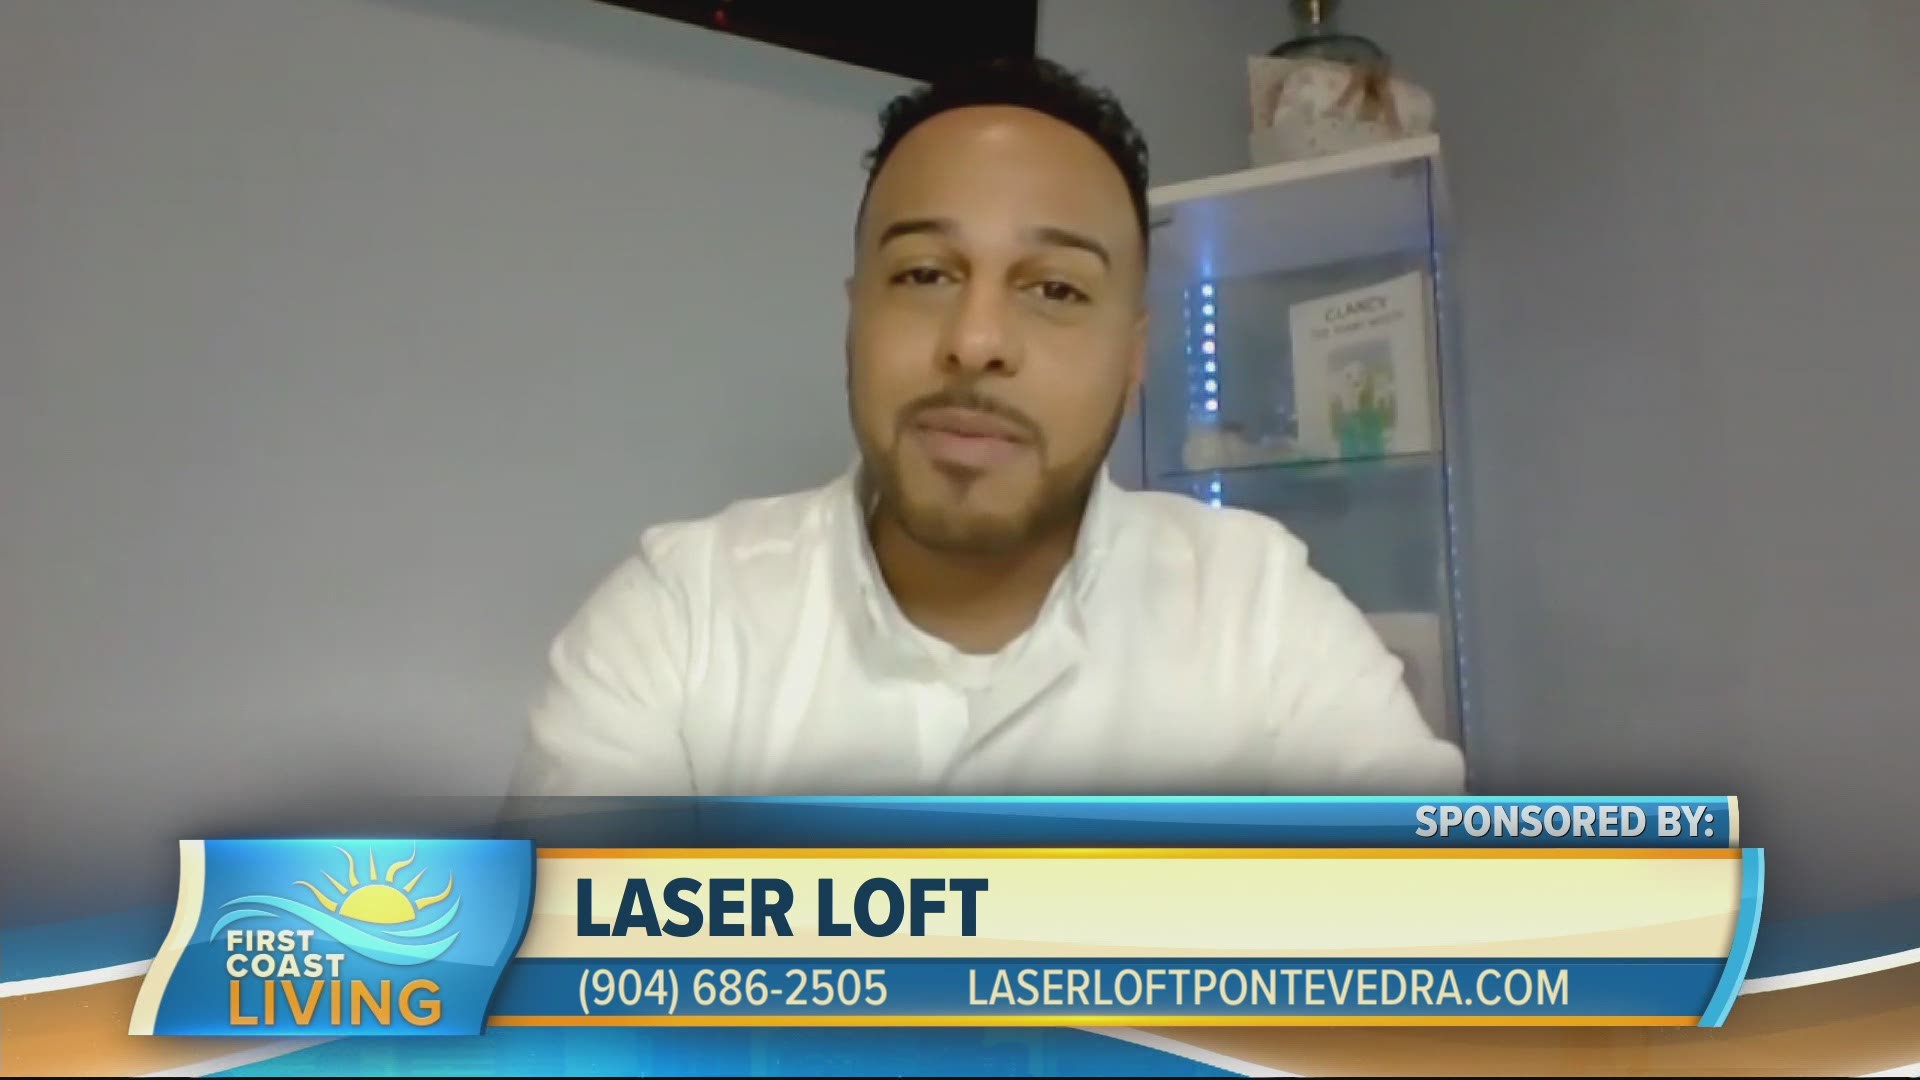 Check out Laser Loft for ways to get your skin glowing